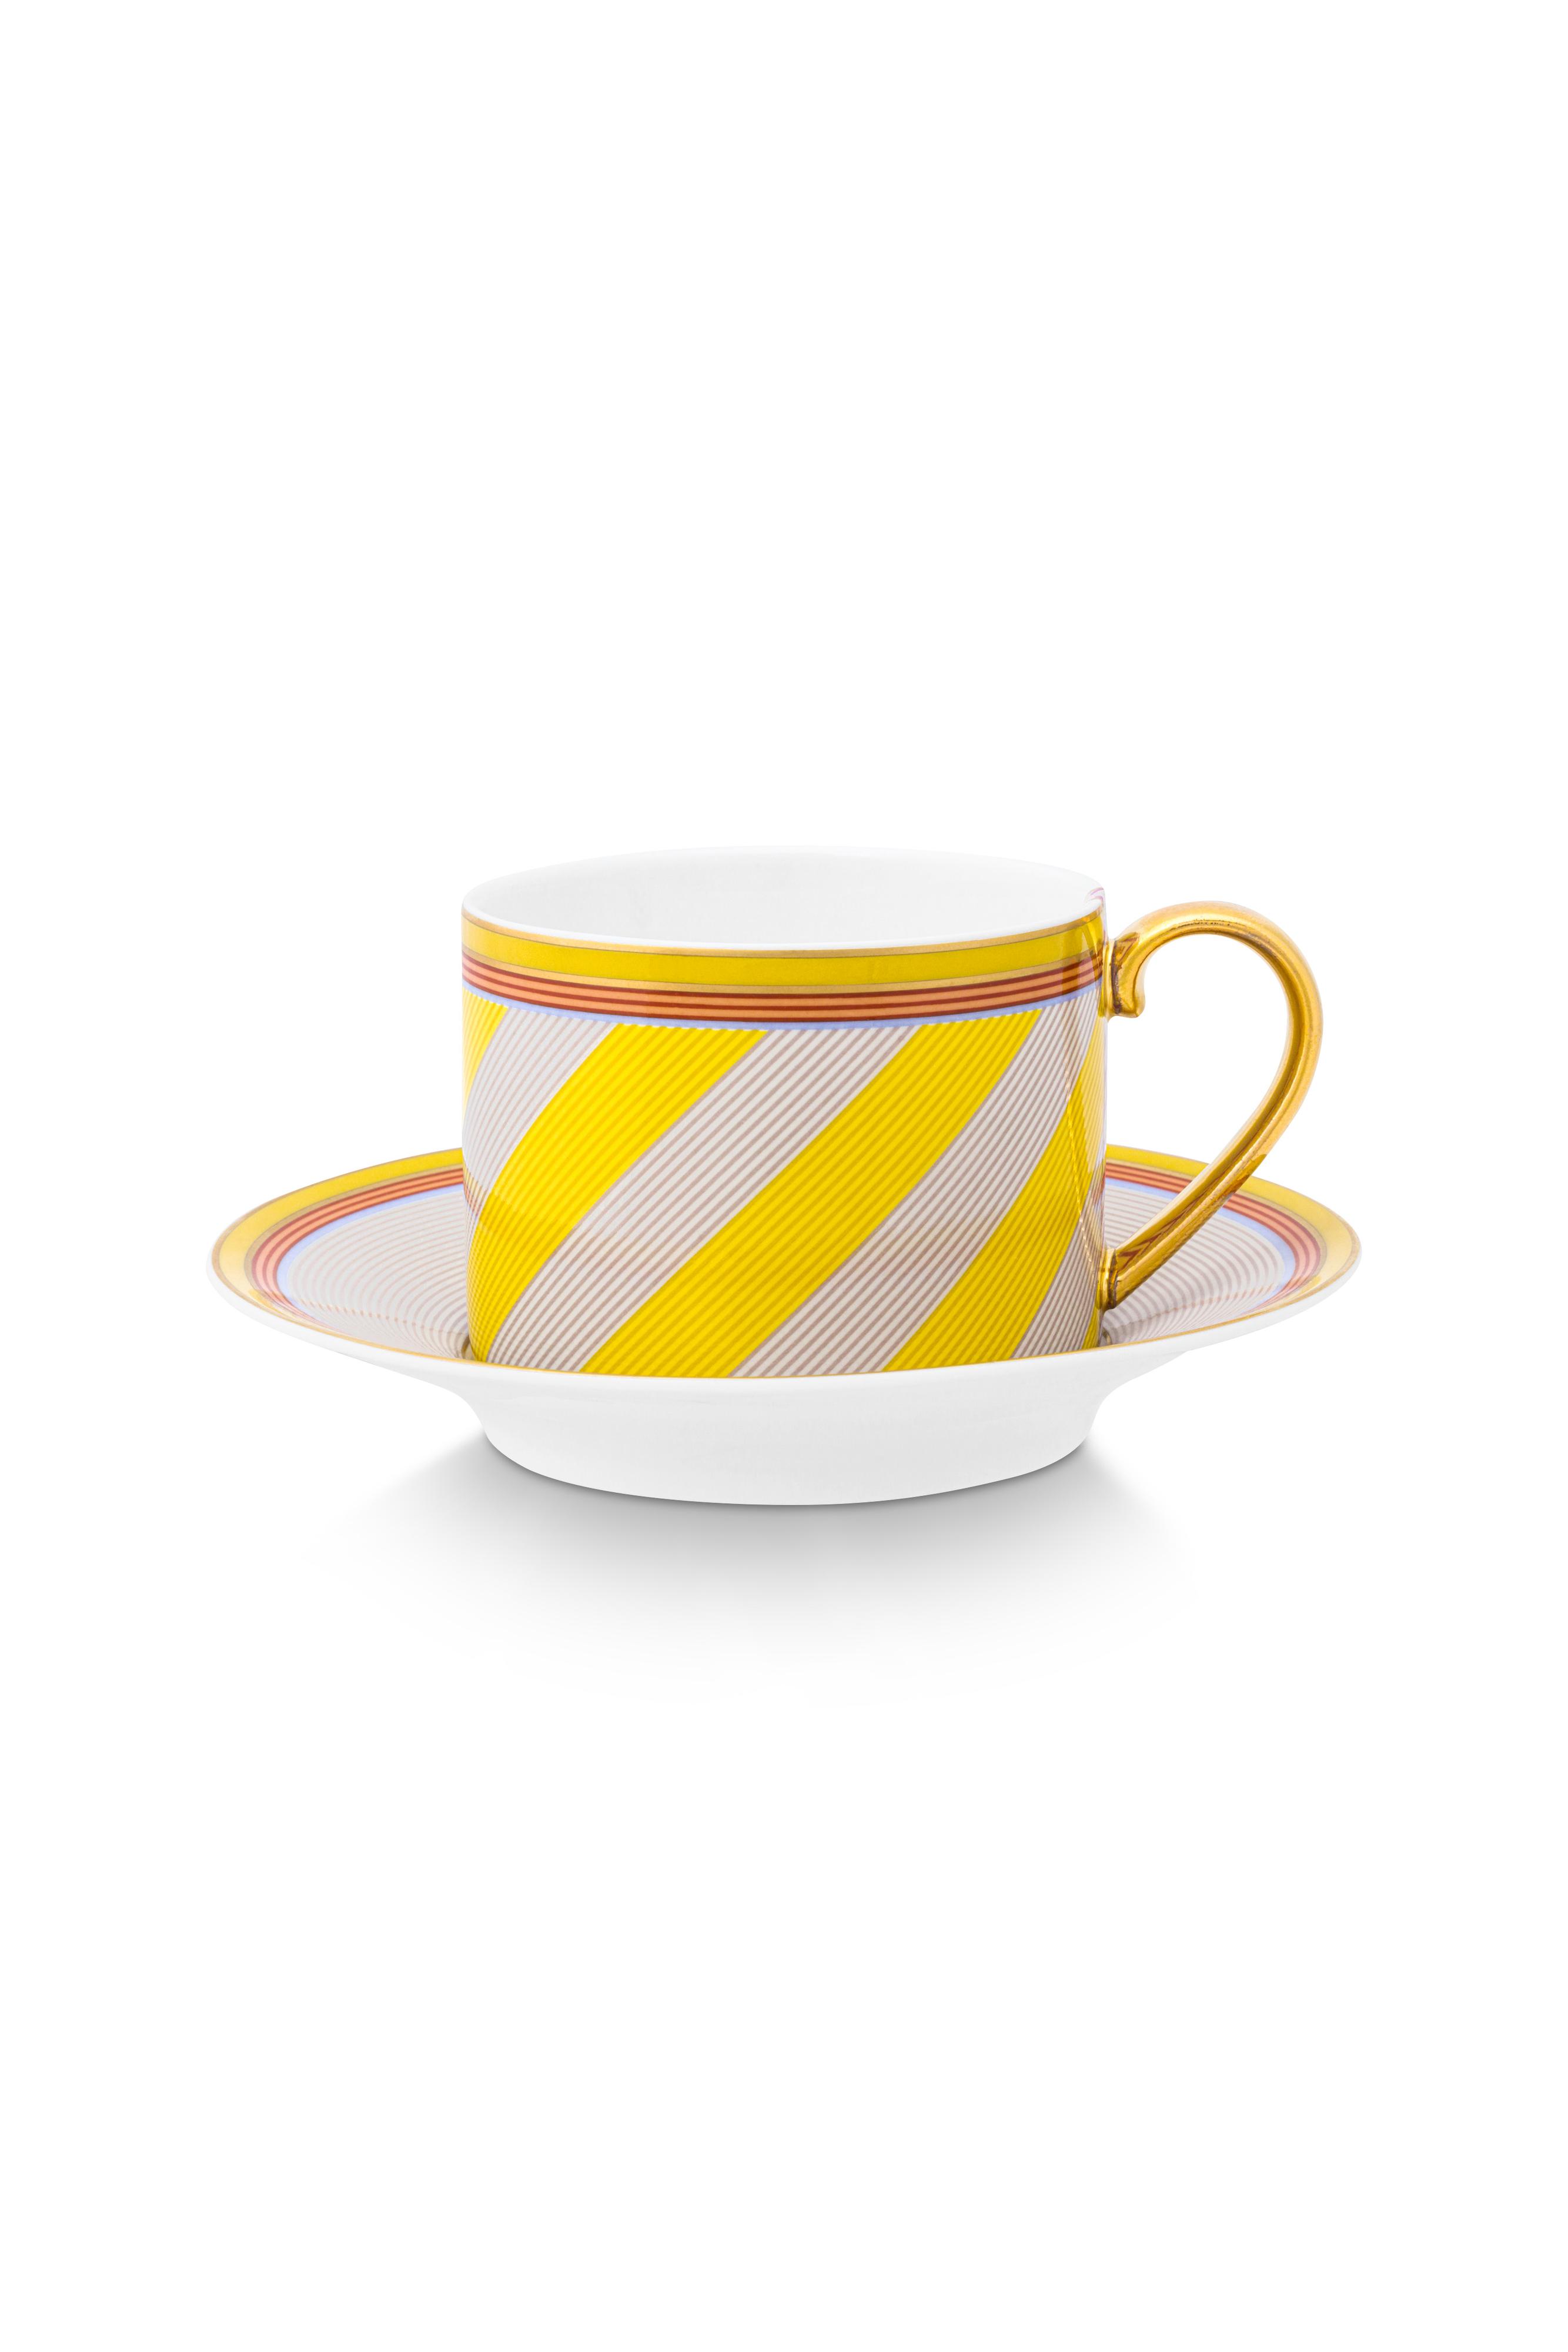 Cup - Saucer Pip Chique Stripes Yellow 220ml Gift